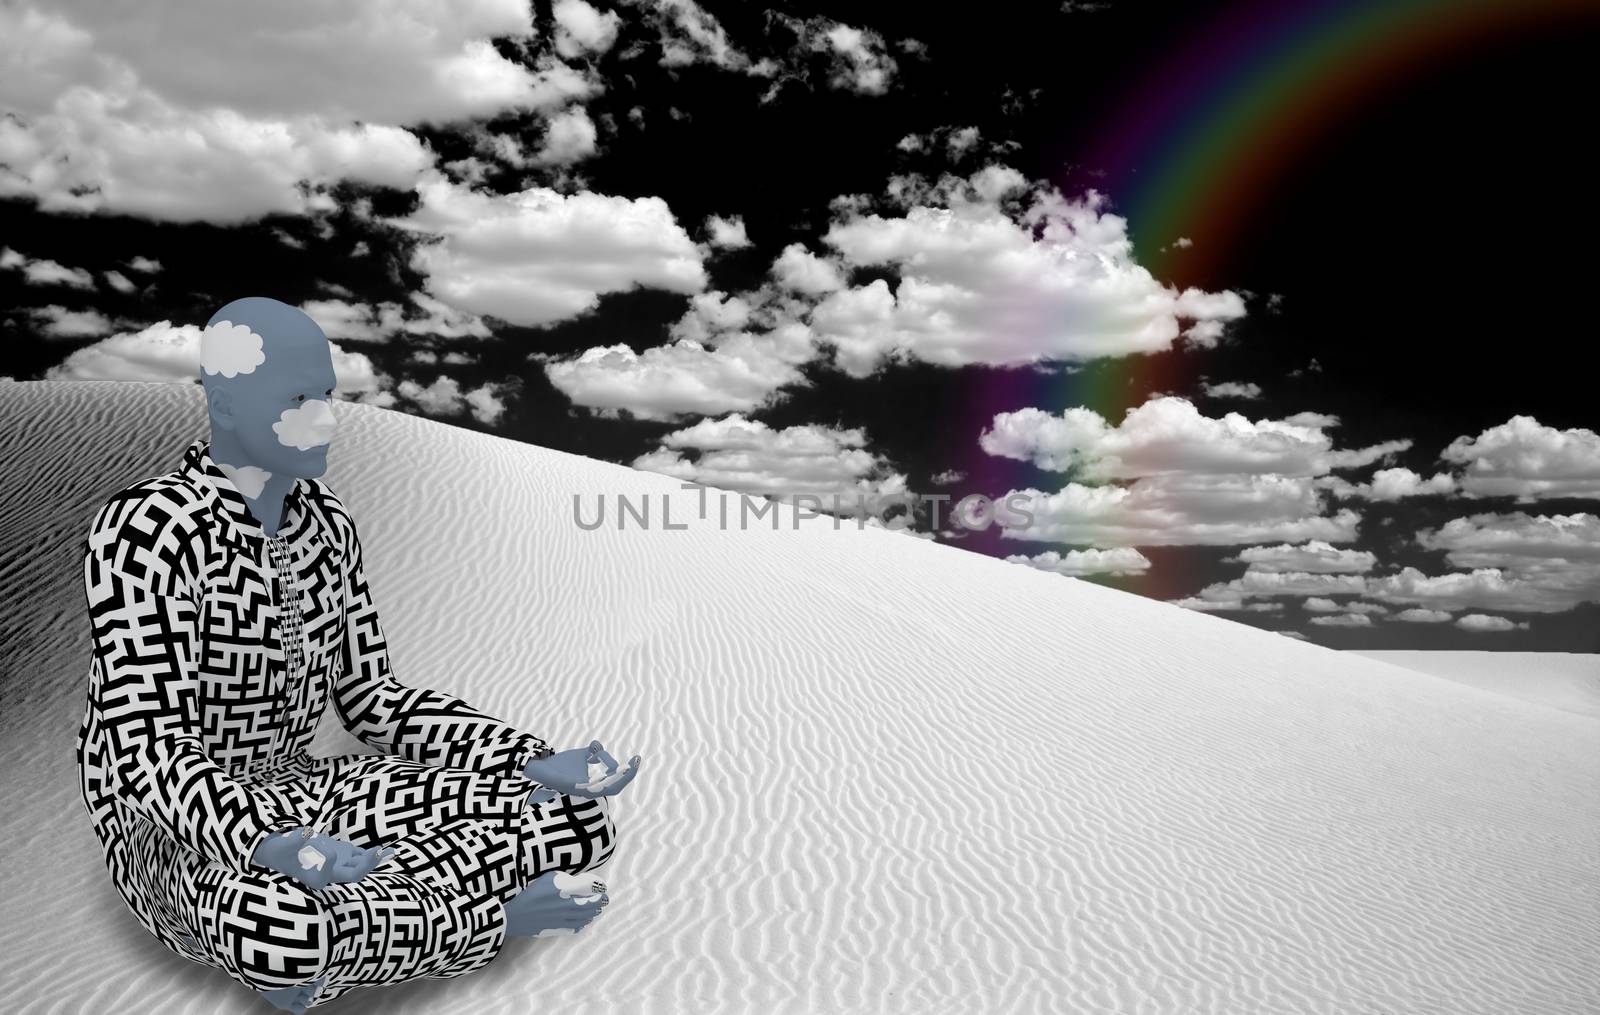 Surrealism. Figure of man in suit with maze pattern sits  in lotus pose in white desert.